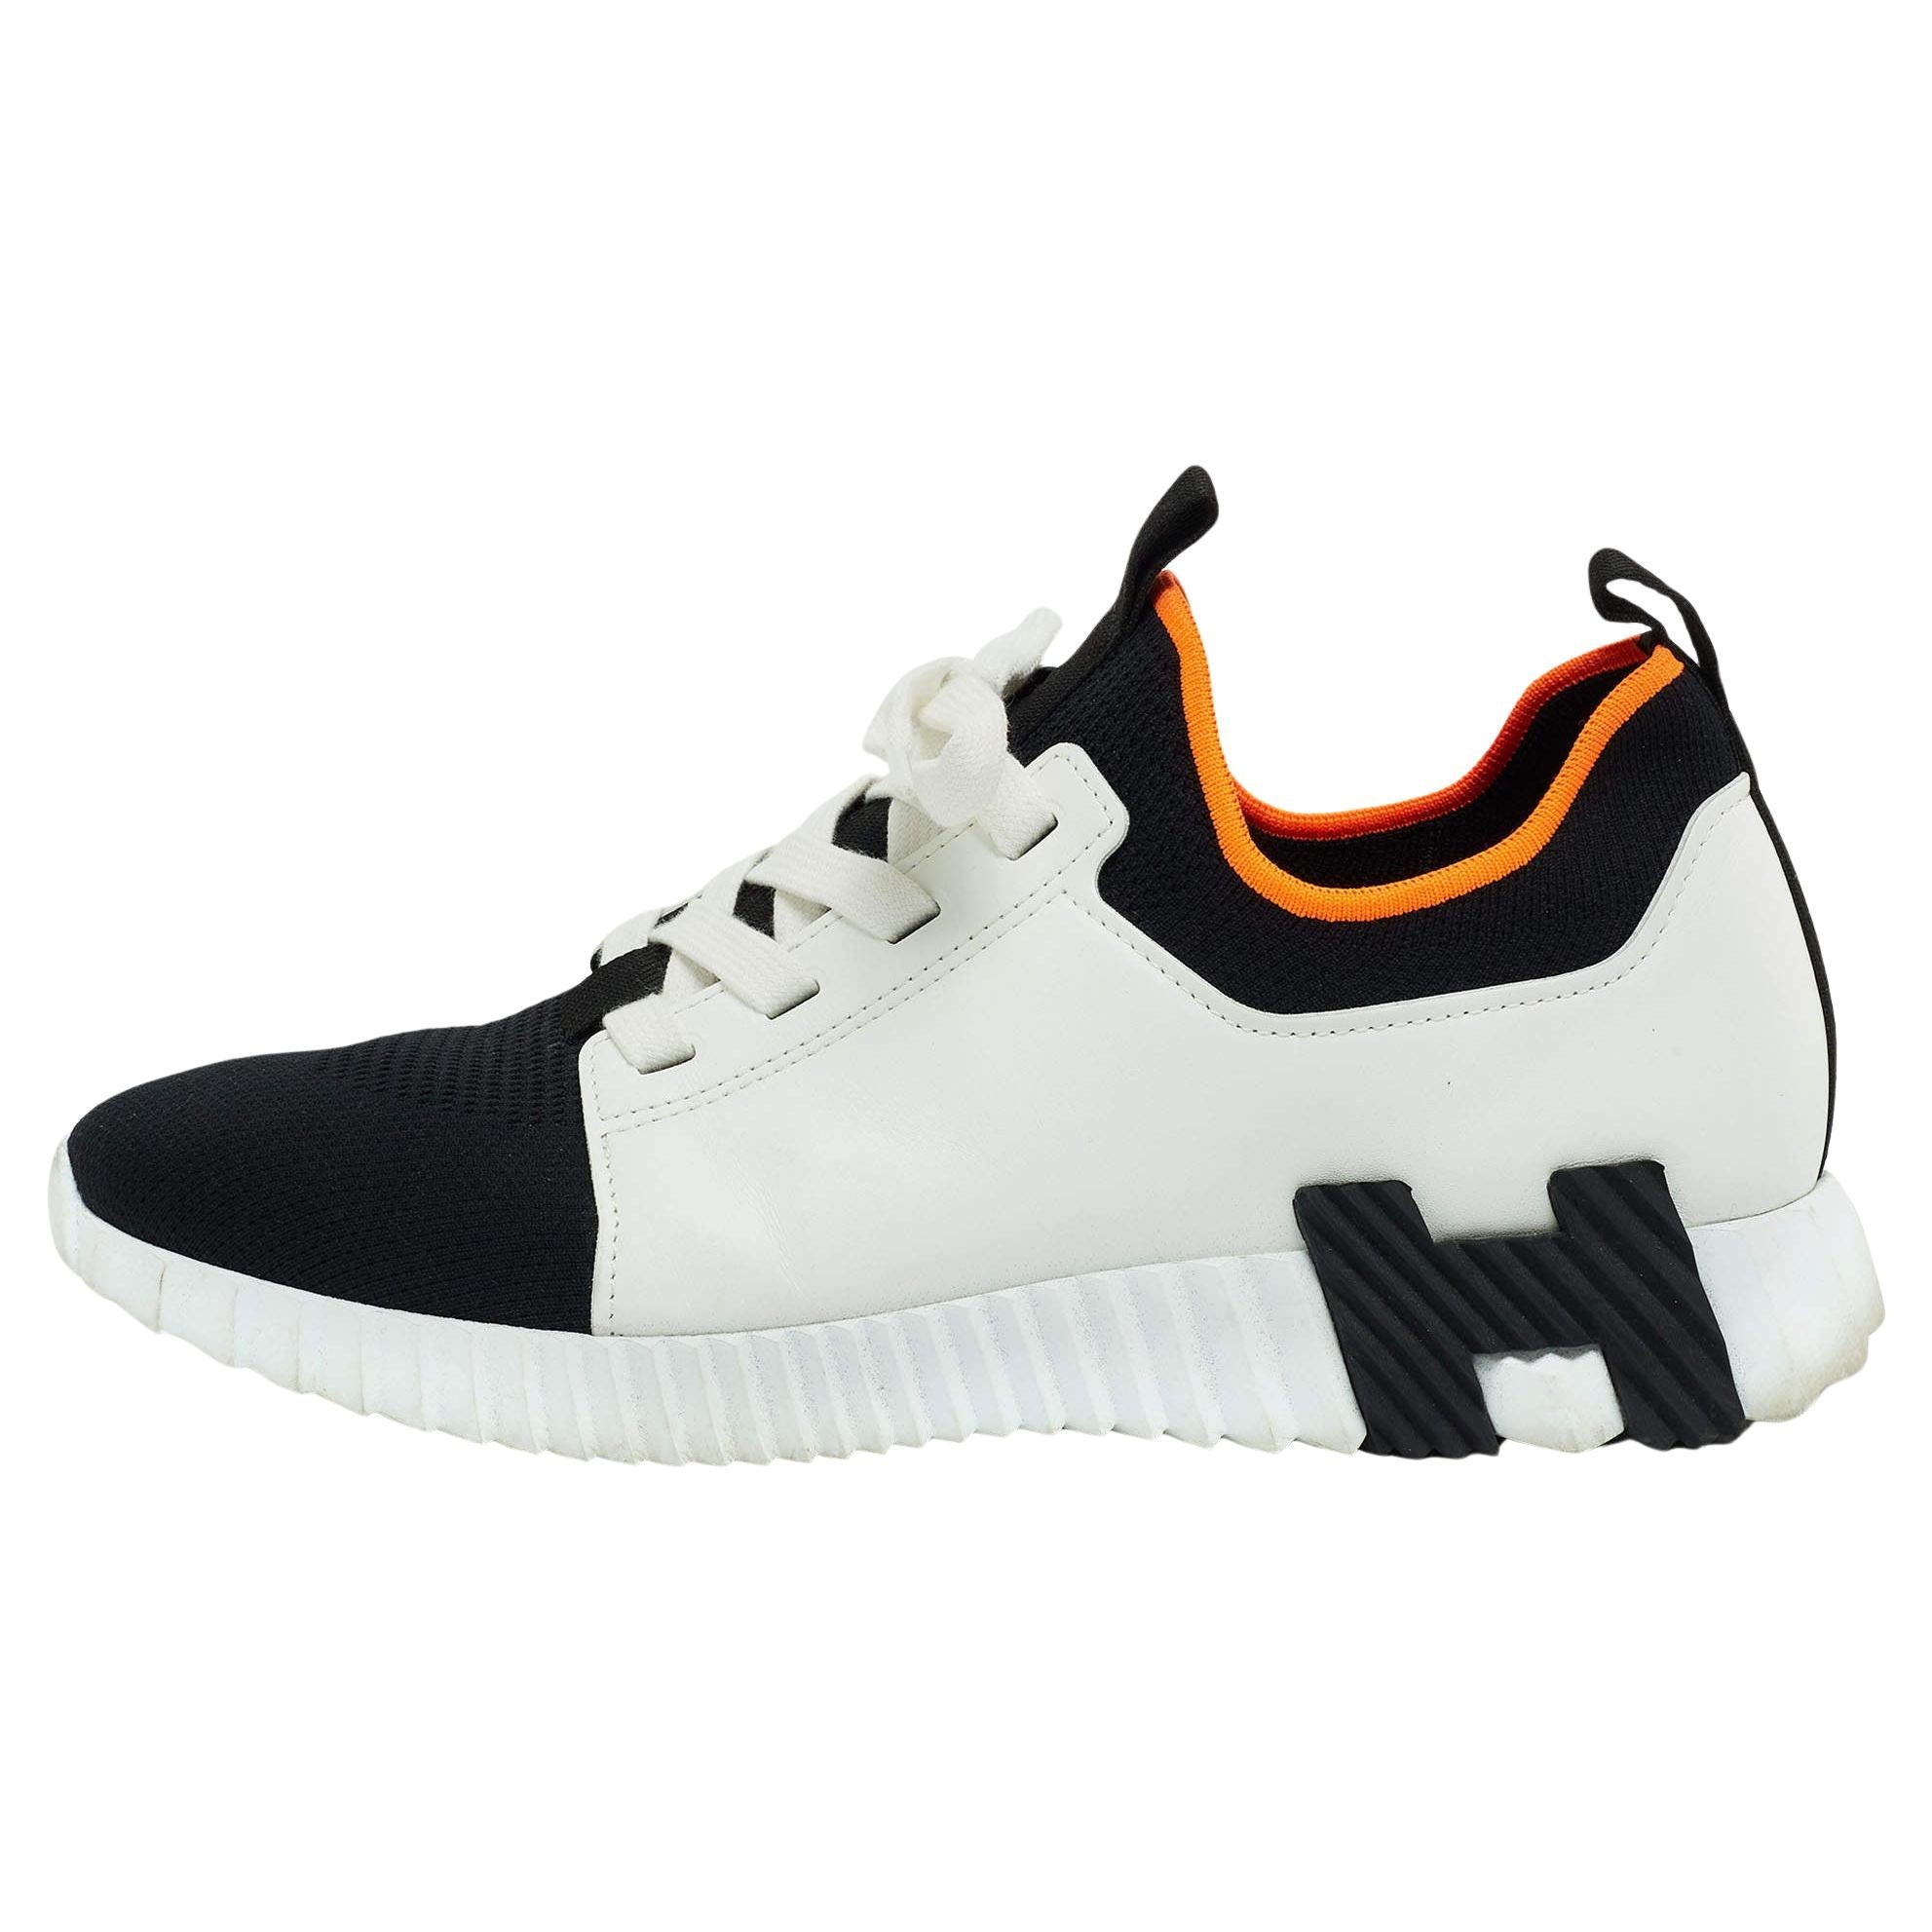 Hermes White/Black Leather and Knit Fabric Depart Sneakers Size 42